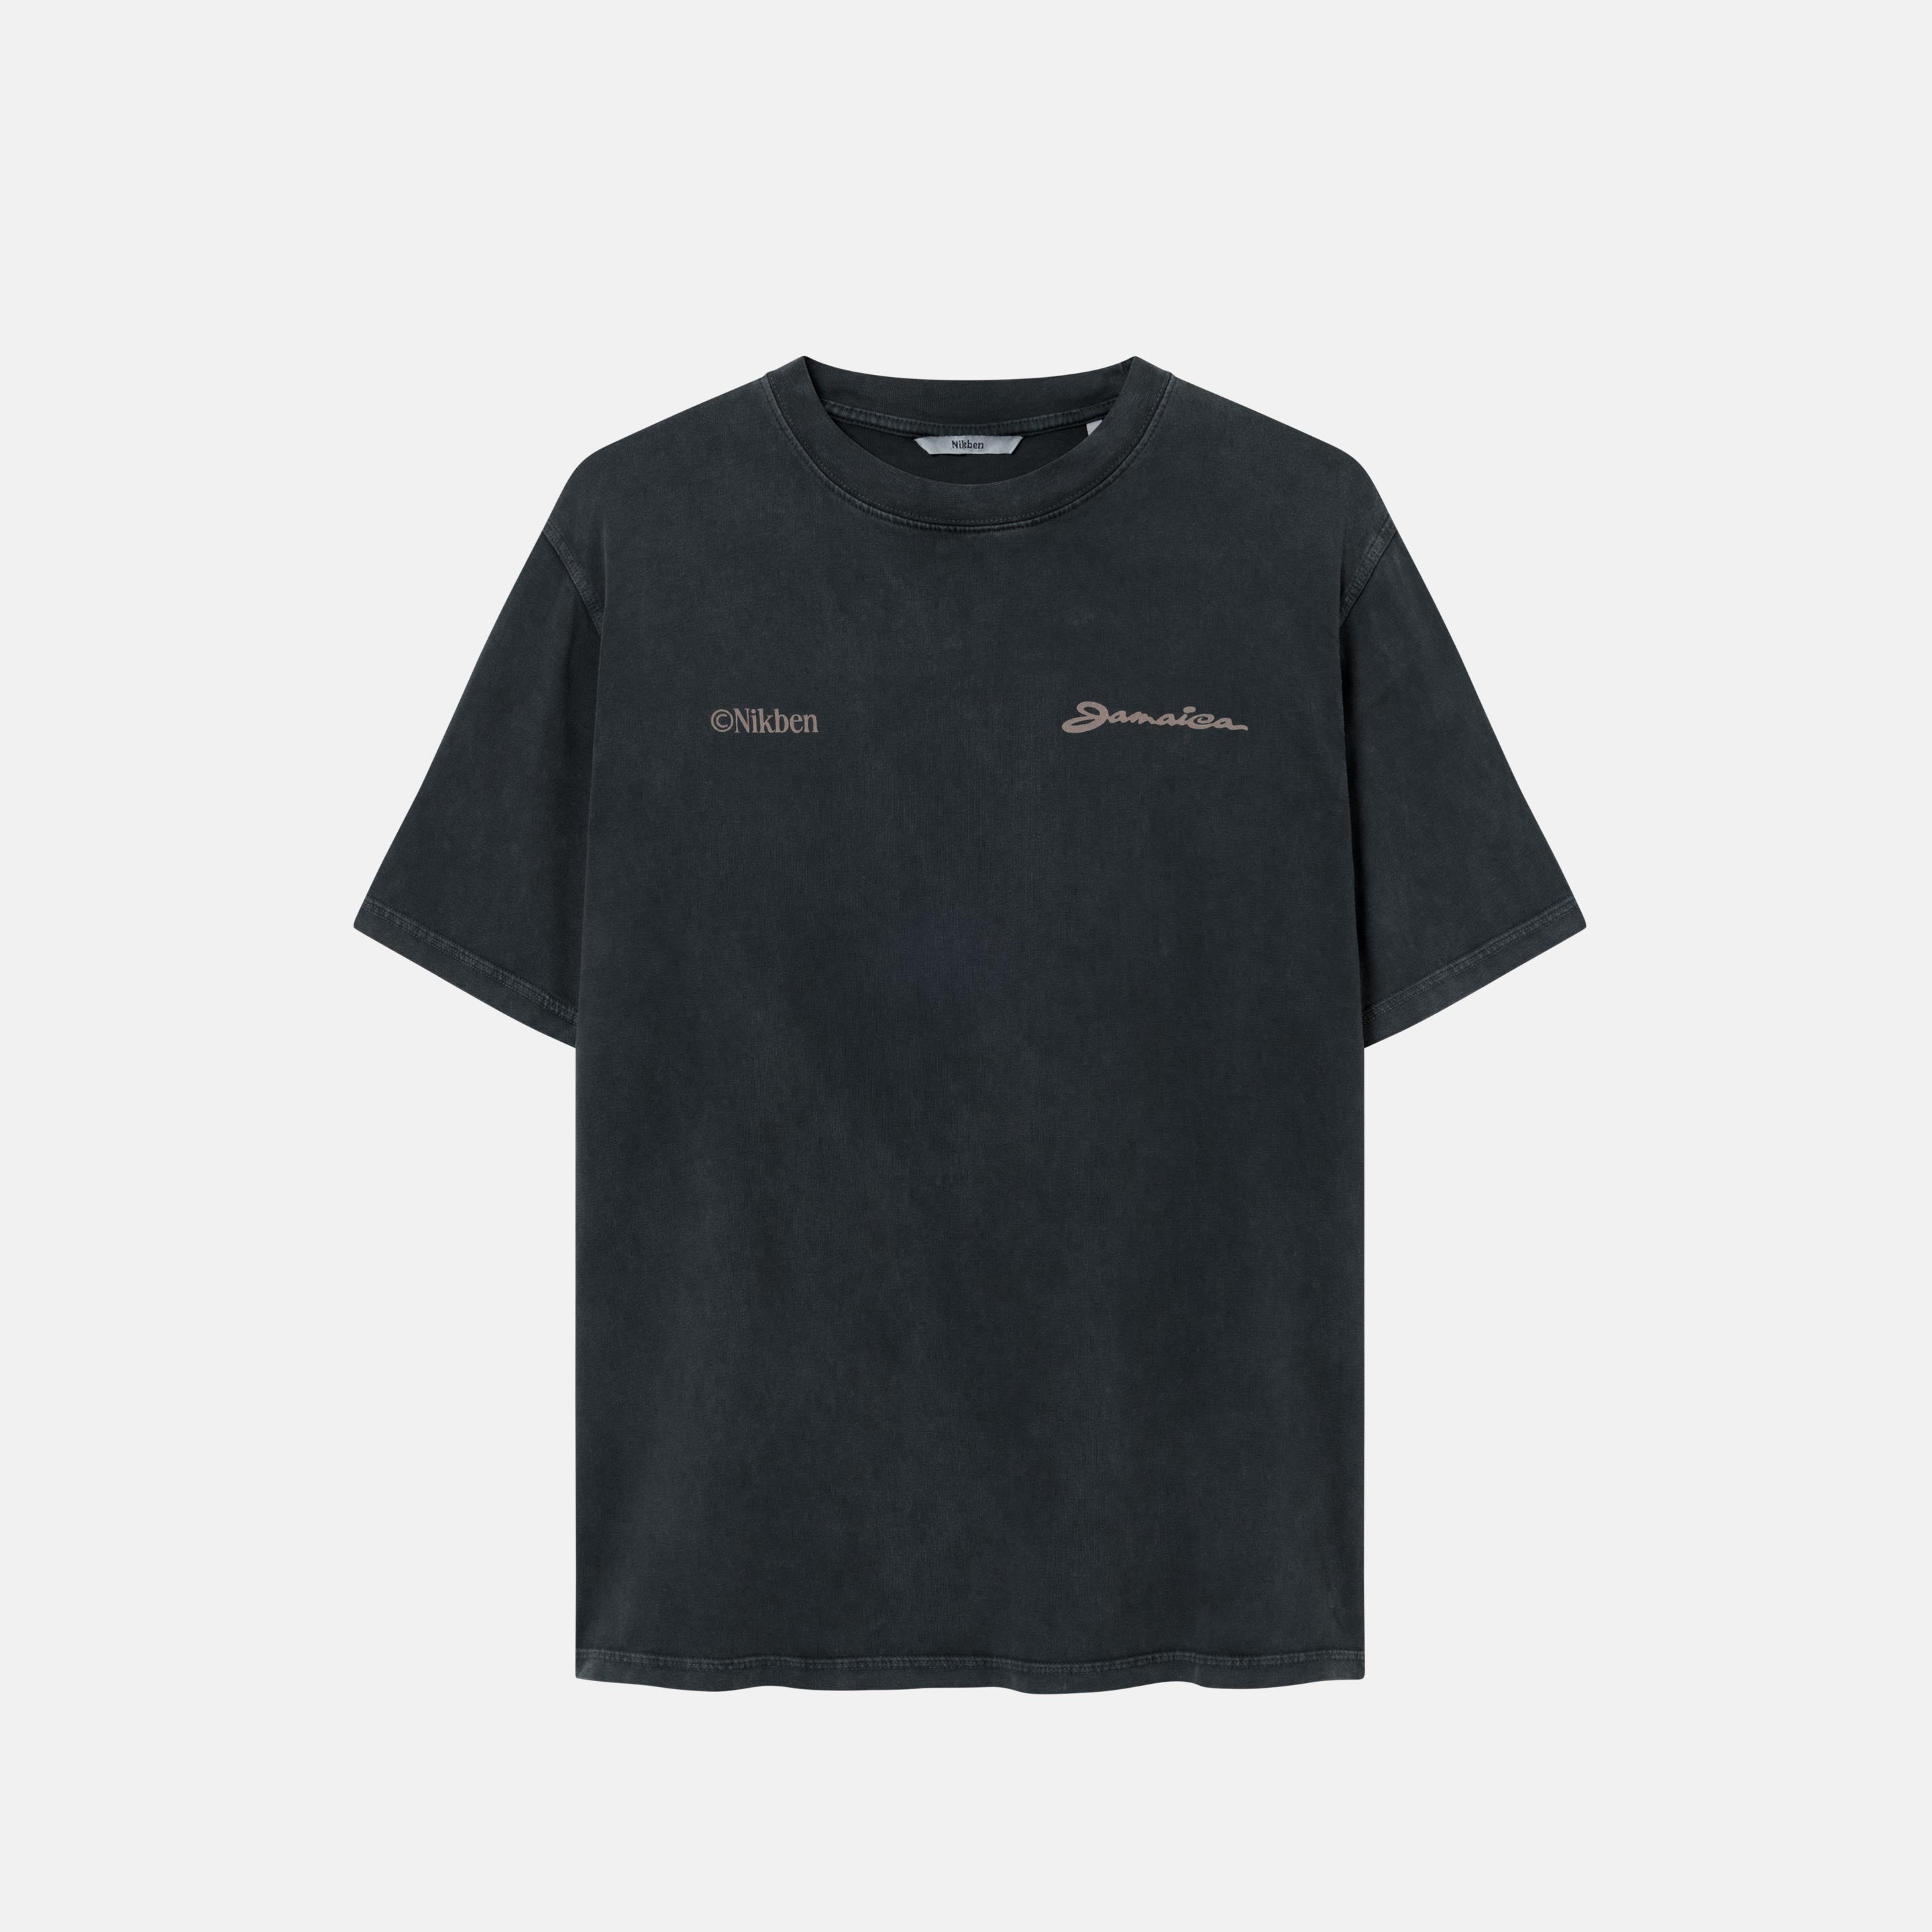 A sand colored t-shirt with "jamaica" text print on a black garment dyed t-shirt 